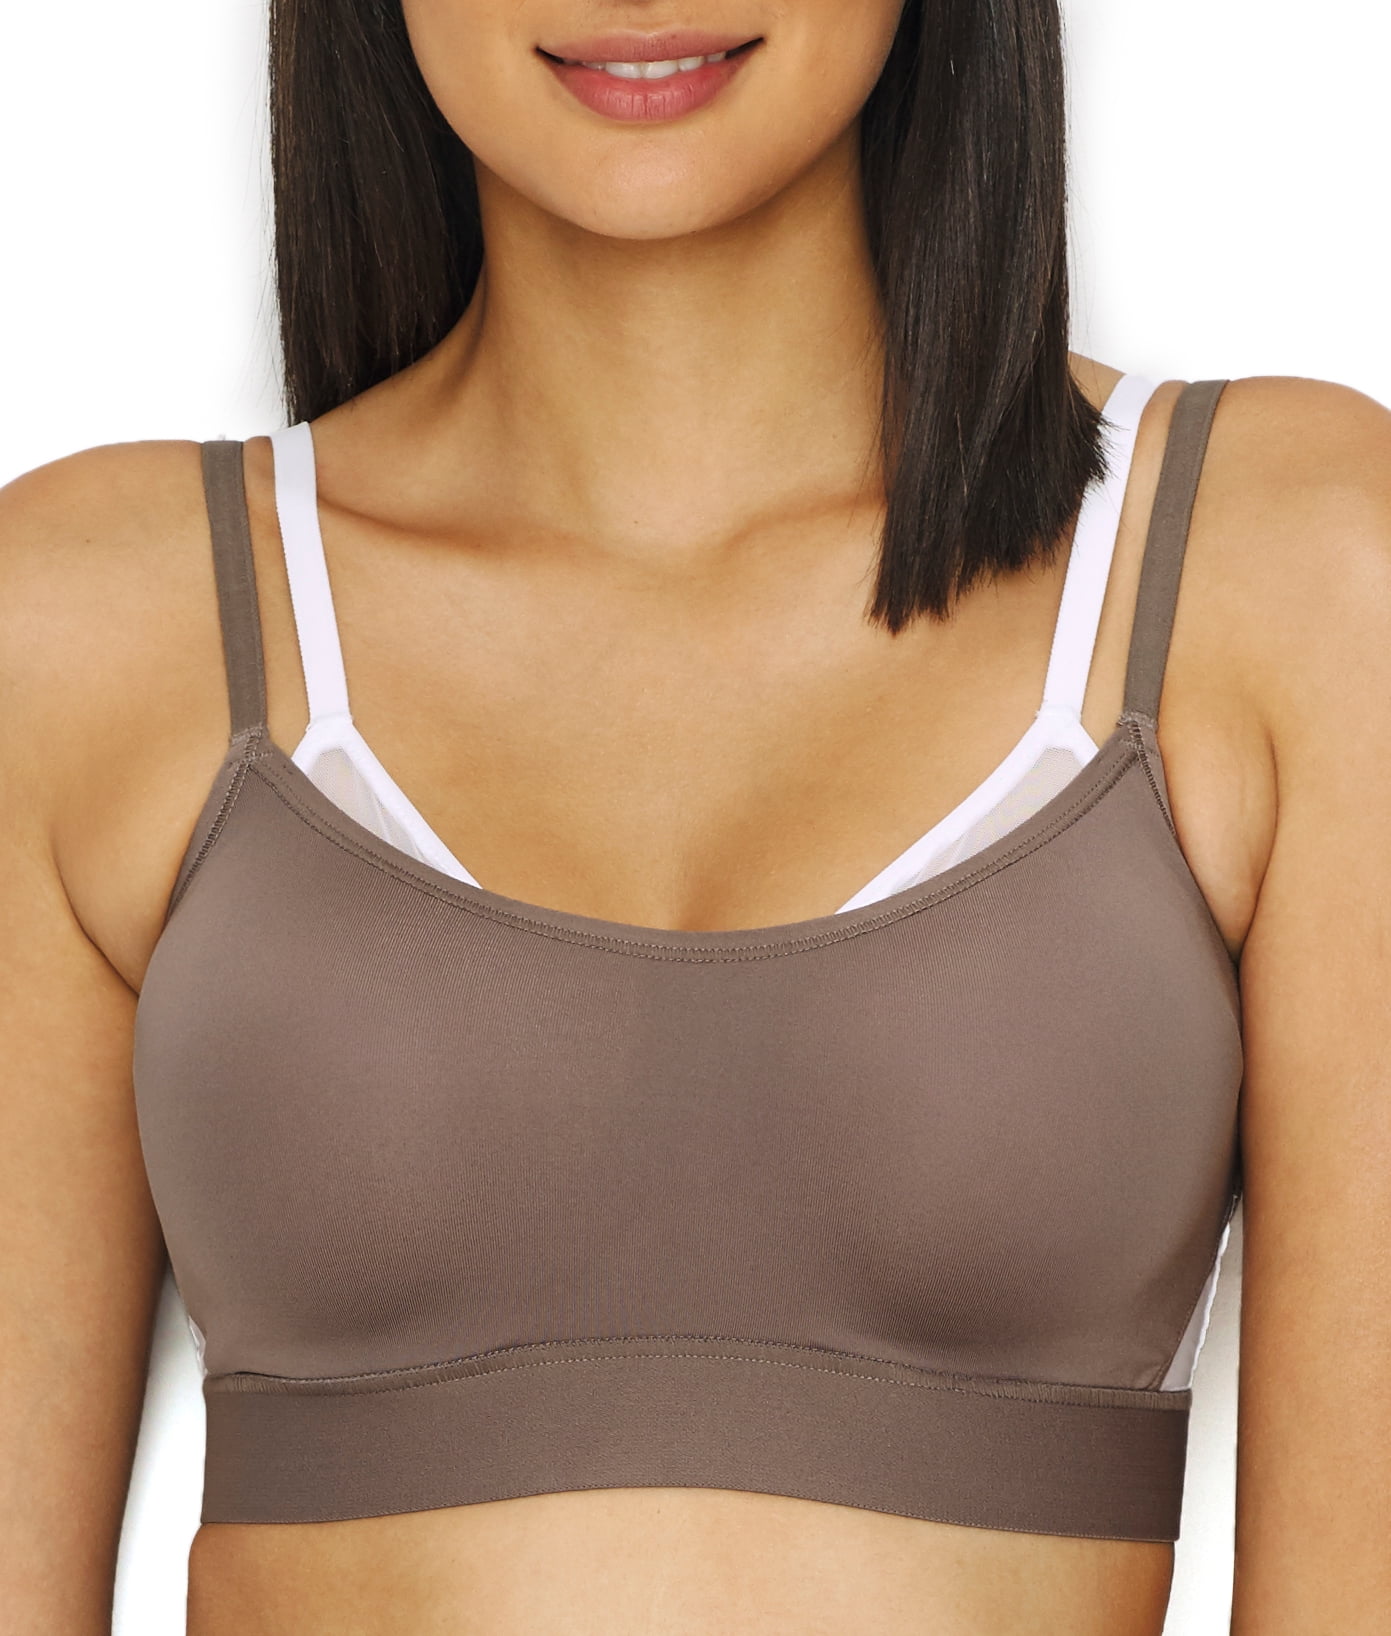 New Yummie By Heather Thompson Tanya Seamless Wire Free Scoop Neck Bra M/L ⭐️